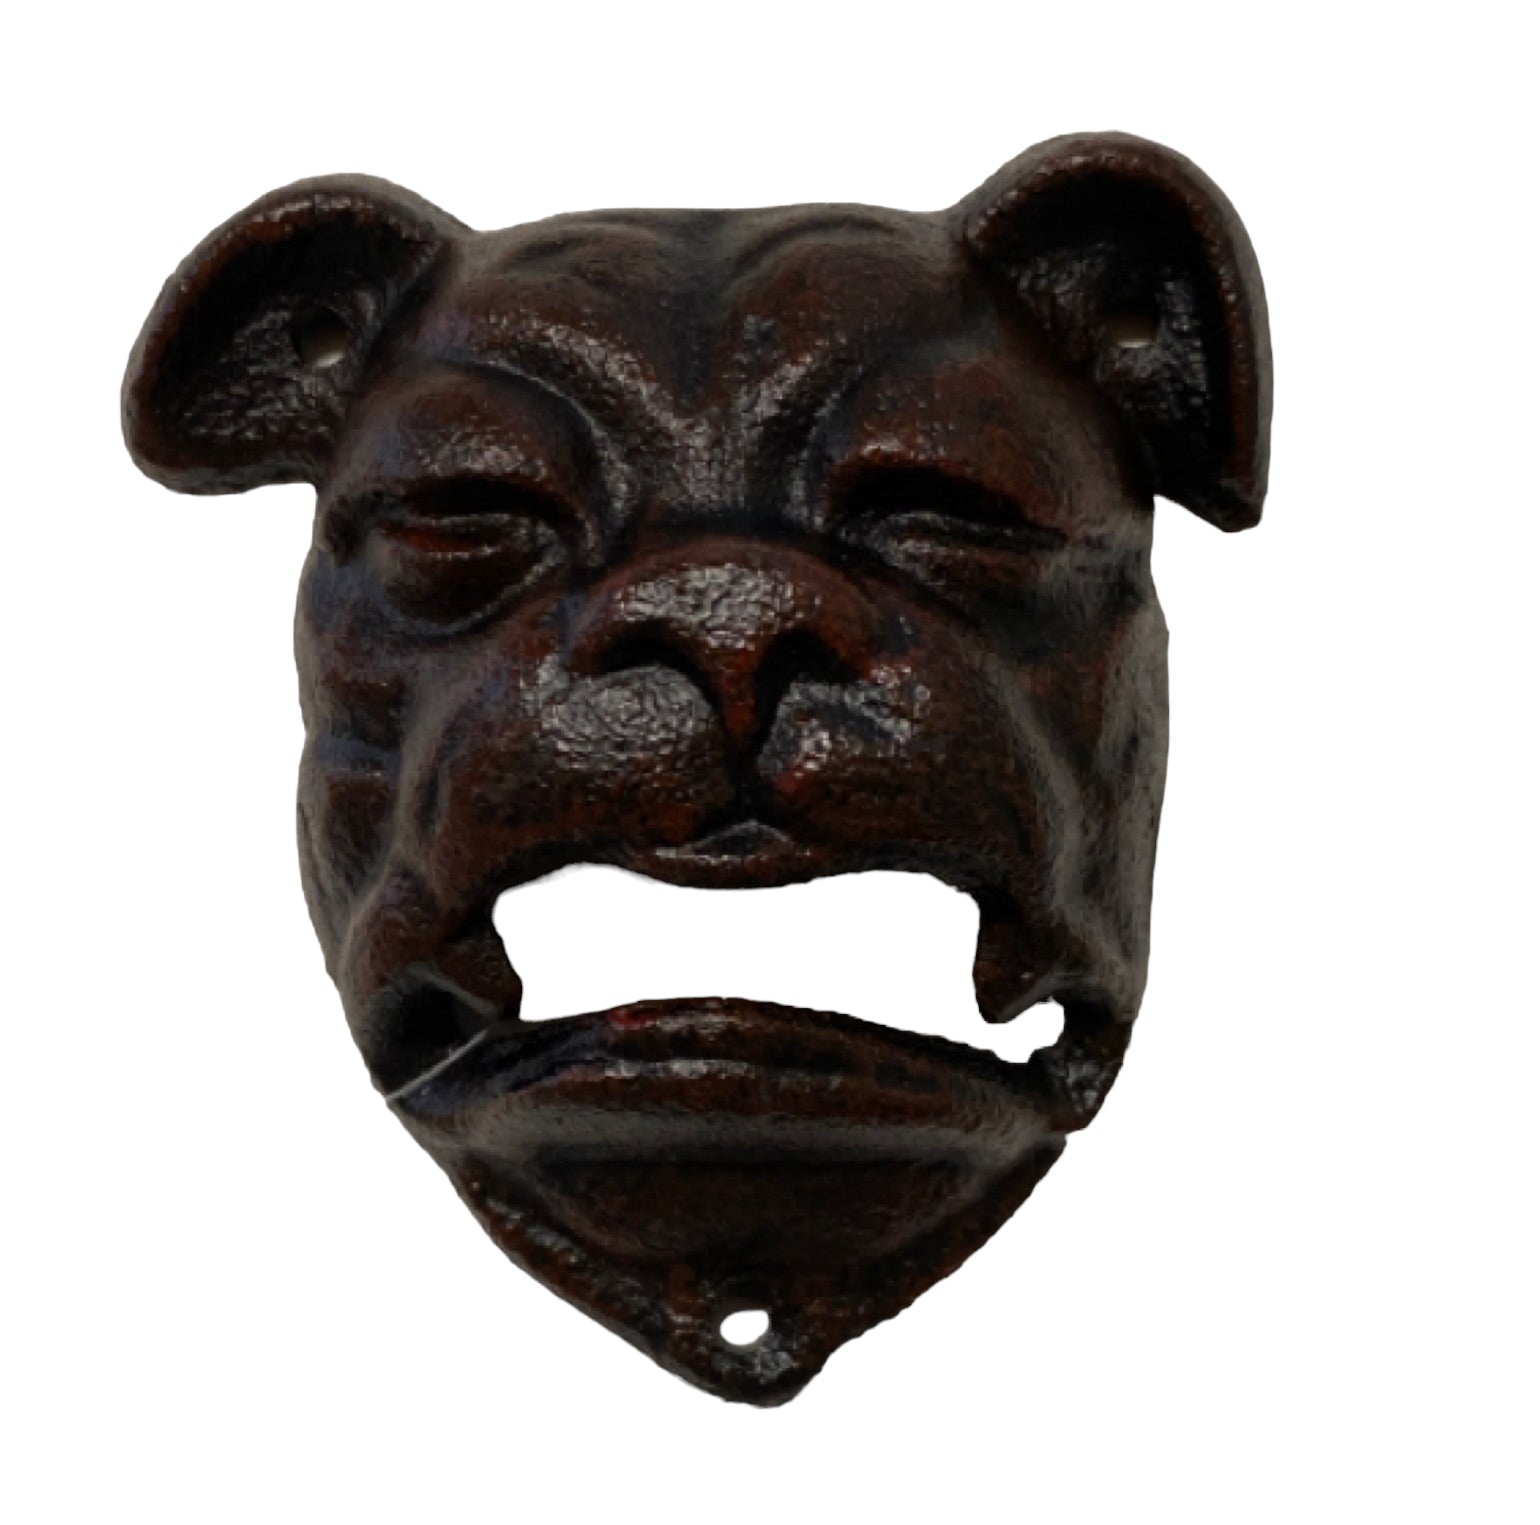 Dog Bulldog Beer Wall Bottle Opener - The Renmy Store Homewares & Gifts 